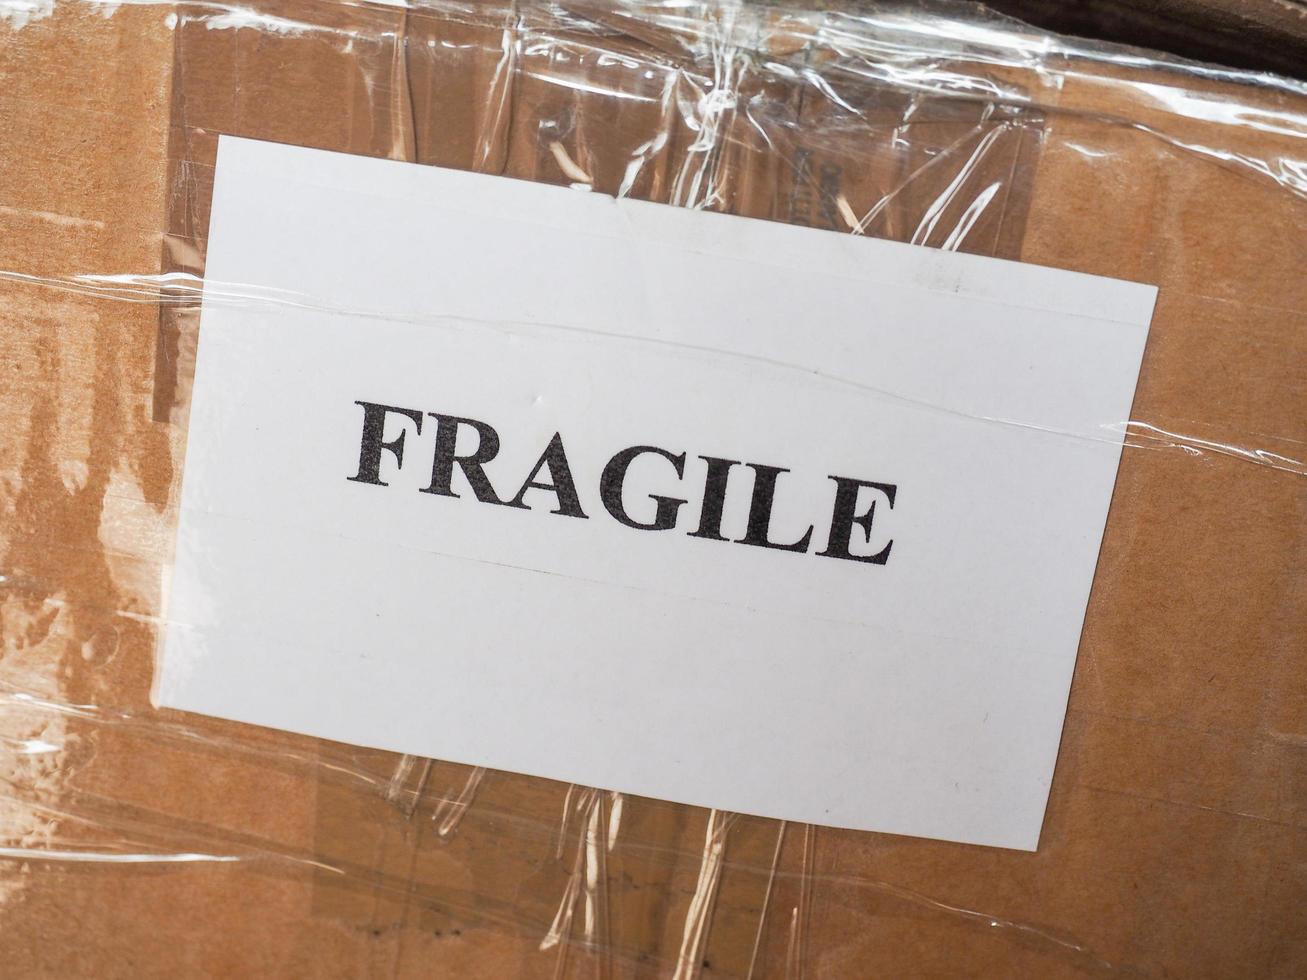 Fragile handle with care sign photo